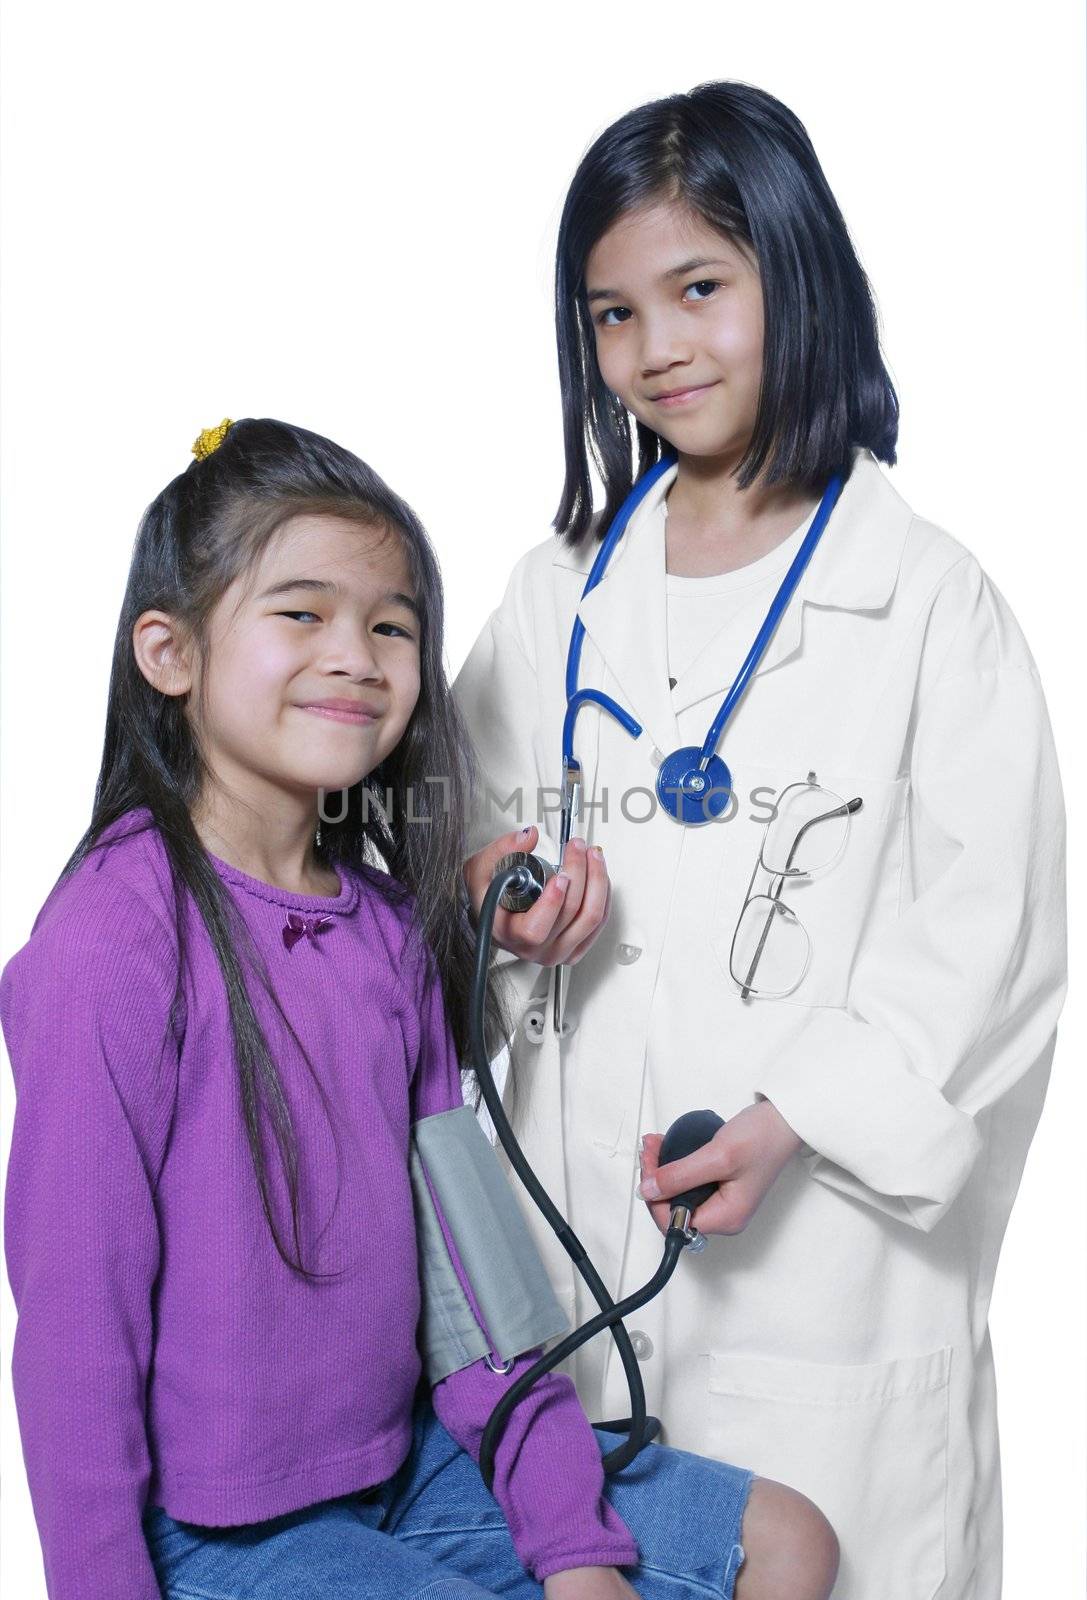 Two girls playing doctor and patient